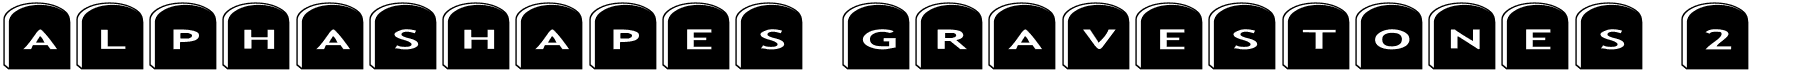 preview image of the AlphaShapes gravestones 2 font